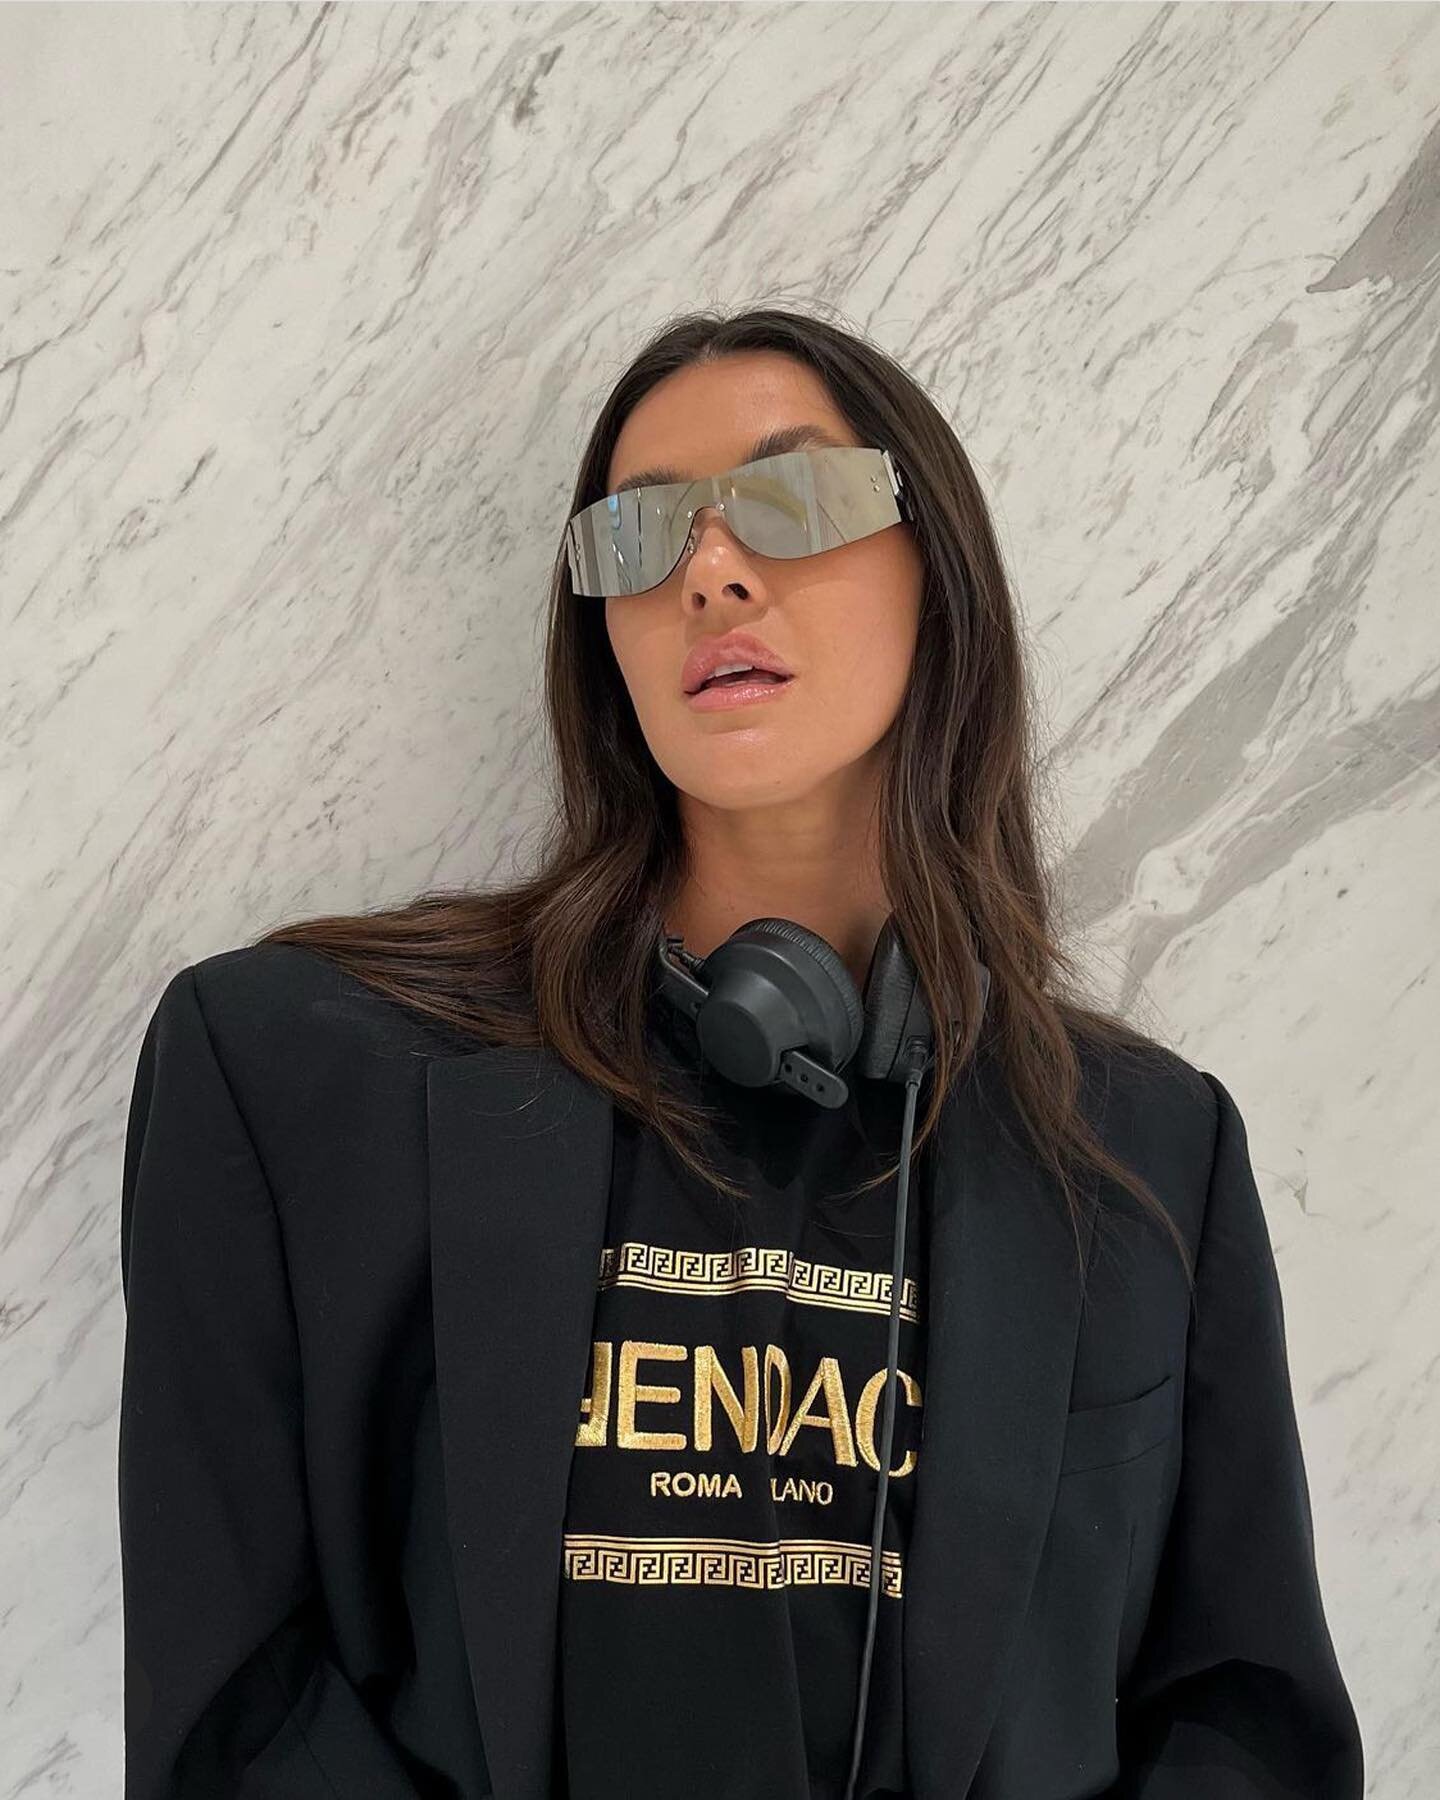 @fendi x @versace = Fendace
@tiana_verhagen at the NYC launch of this collab. We programmed 25 events nationwide 🖤💛🖤💛
.
.
.
.
#fendace #nycdj